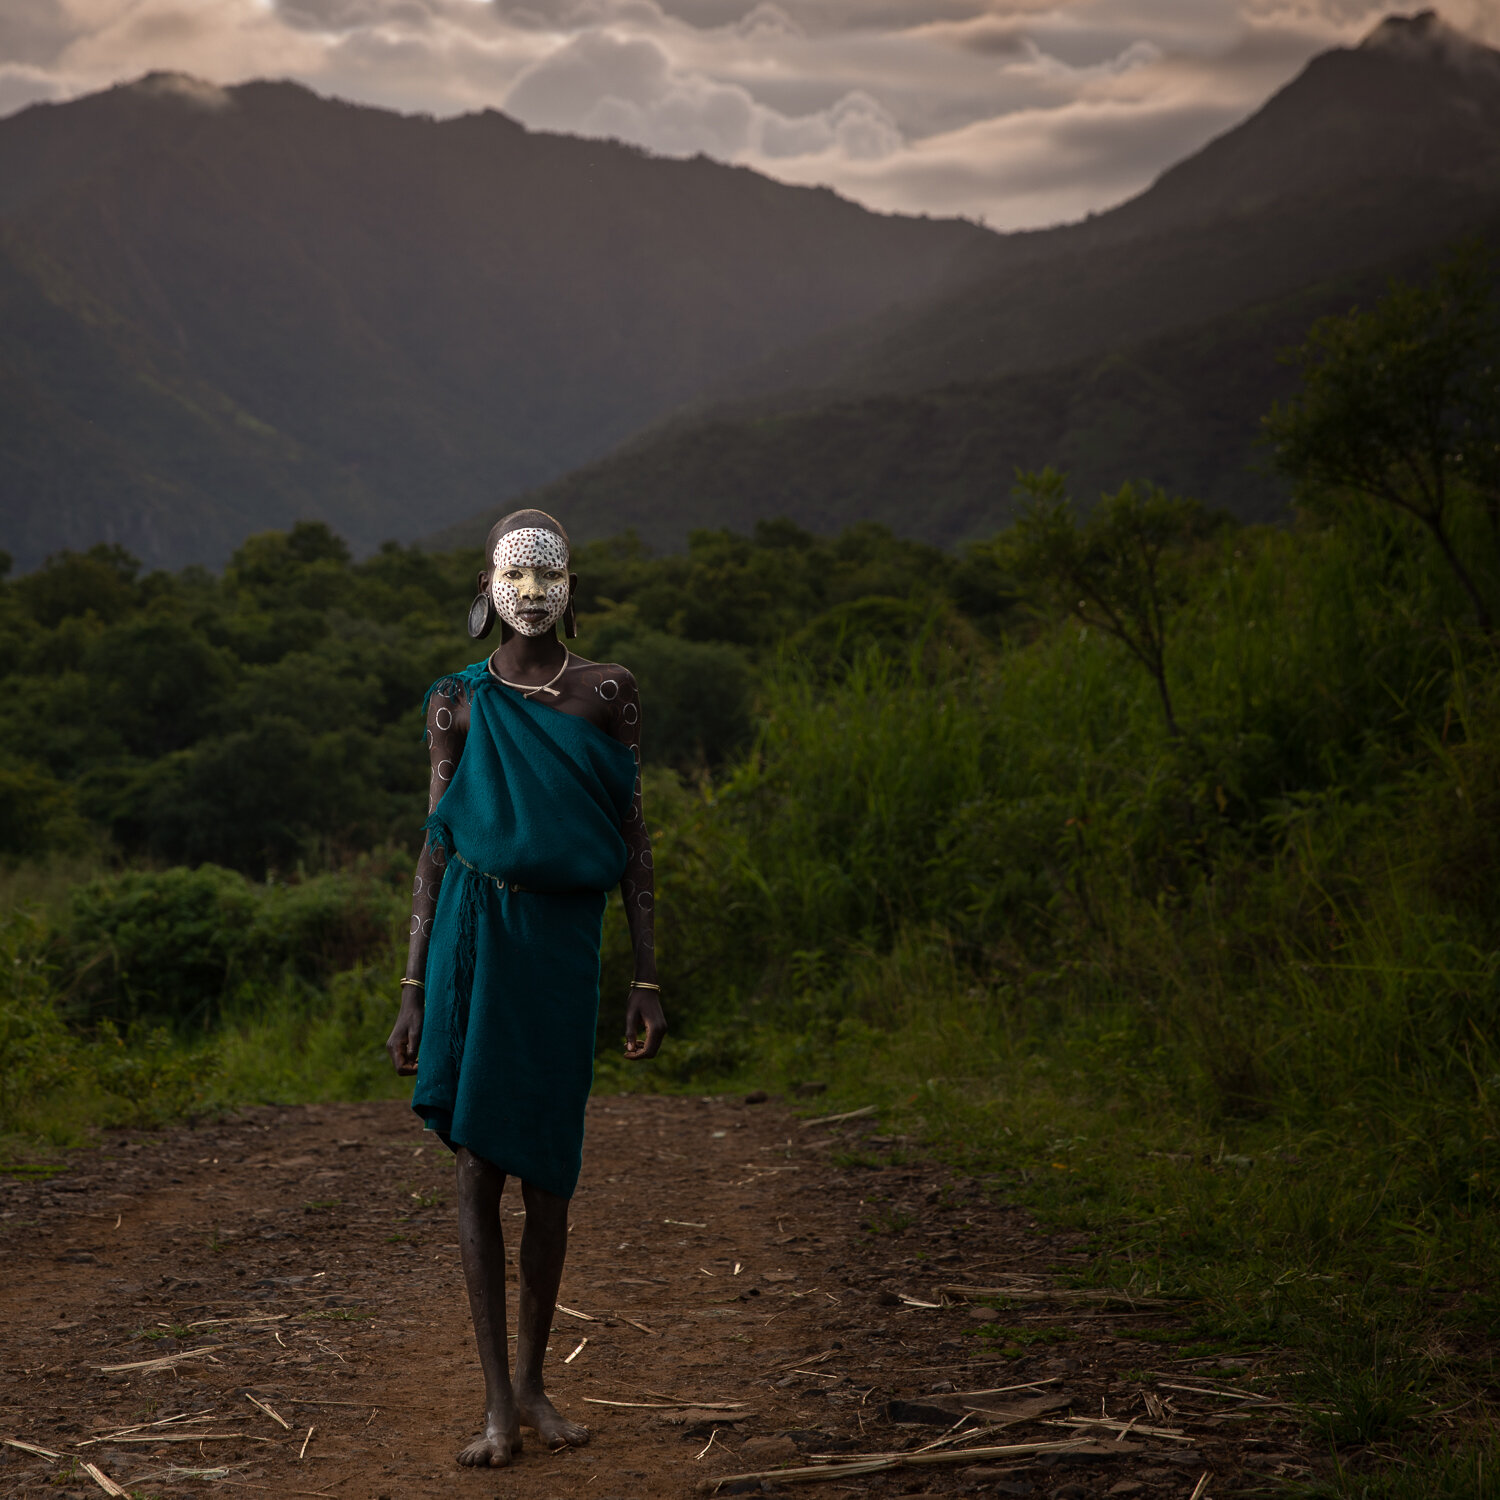  A young Suri   girl walks towards her village as the sun goes down.&nbsp;The  Suri tribe  is very creative with body painting and decoration. 